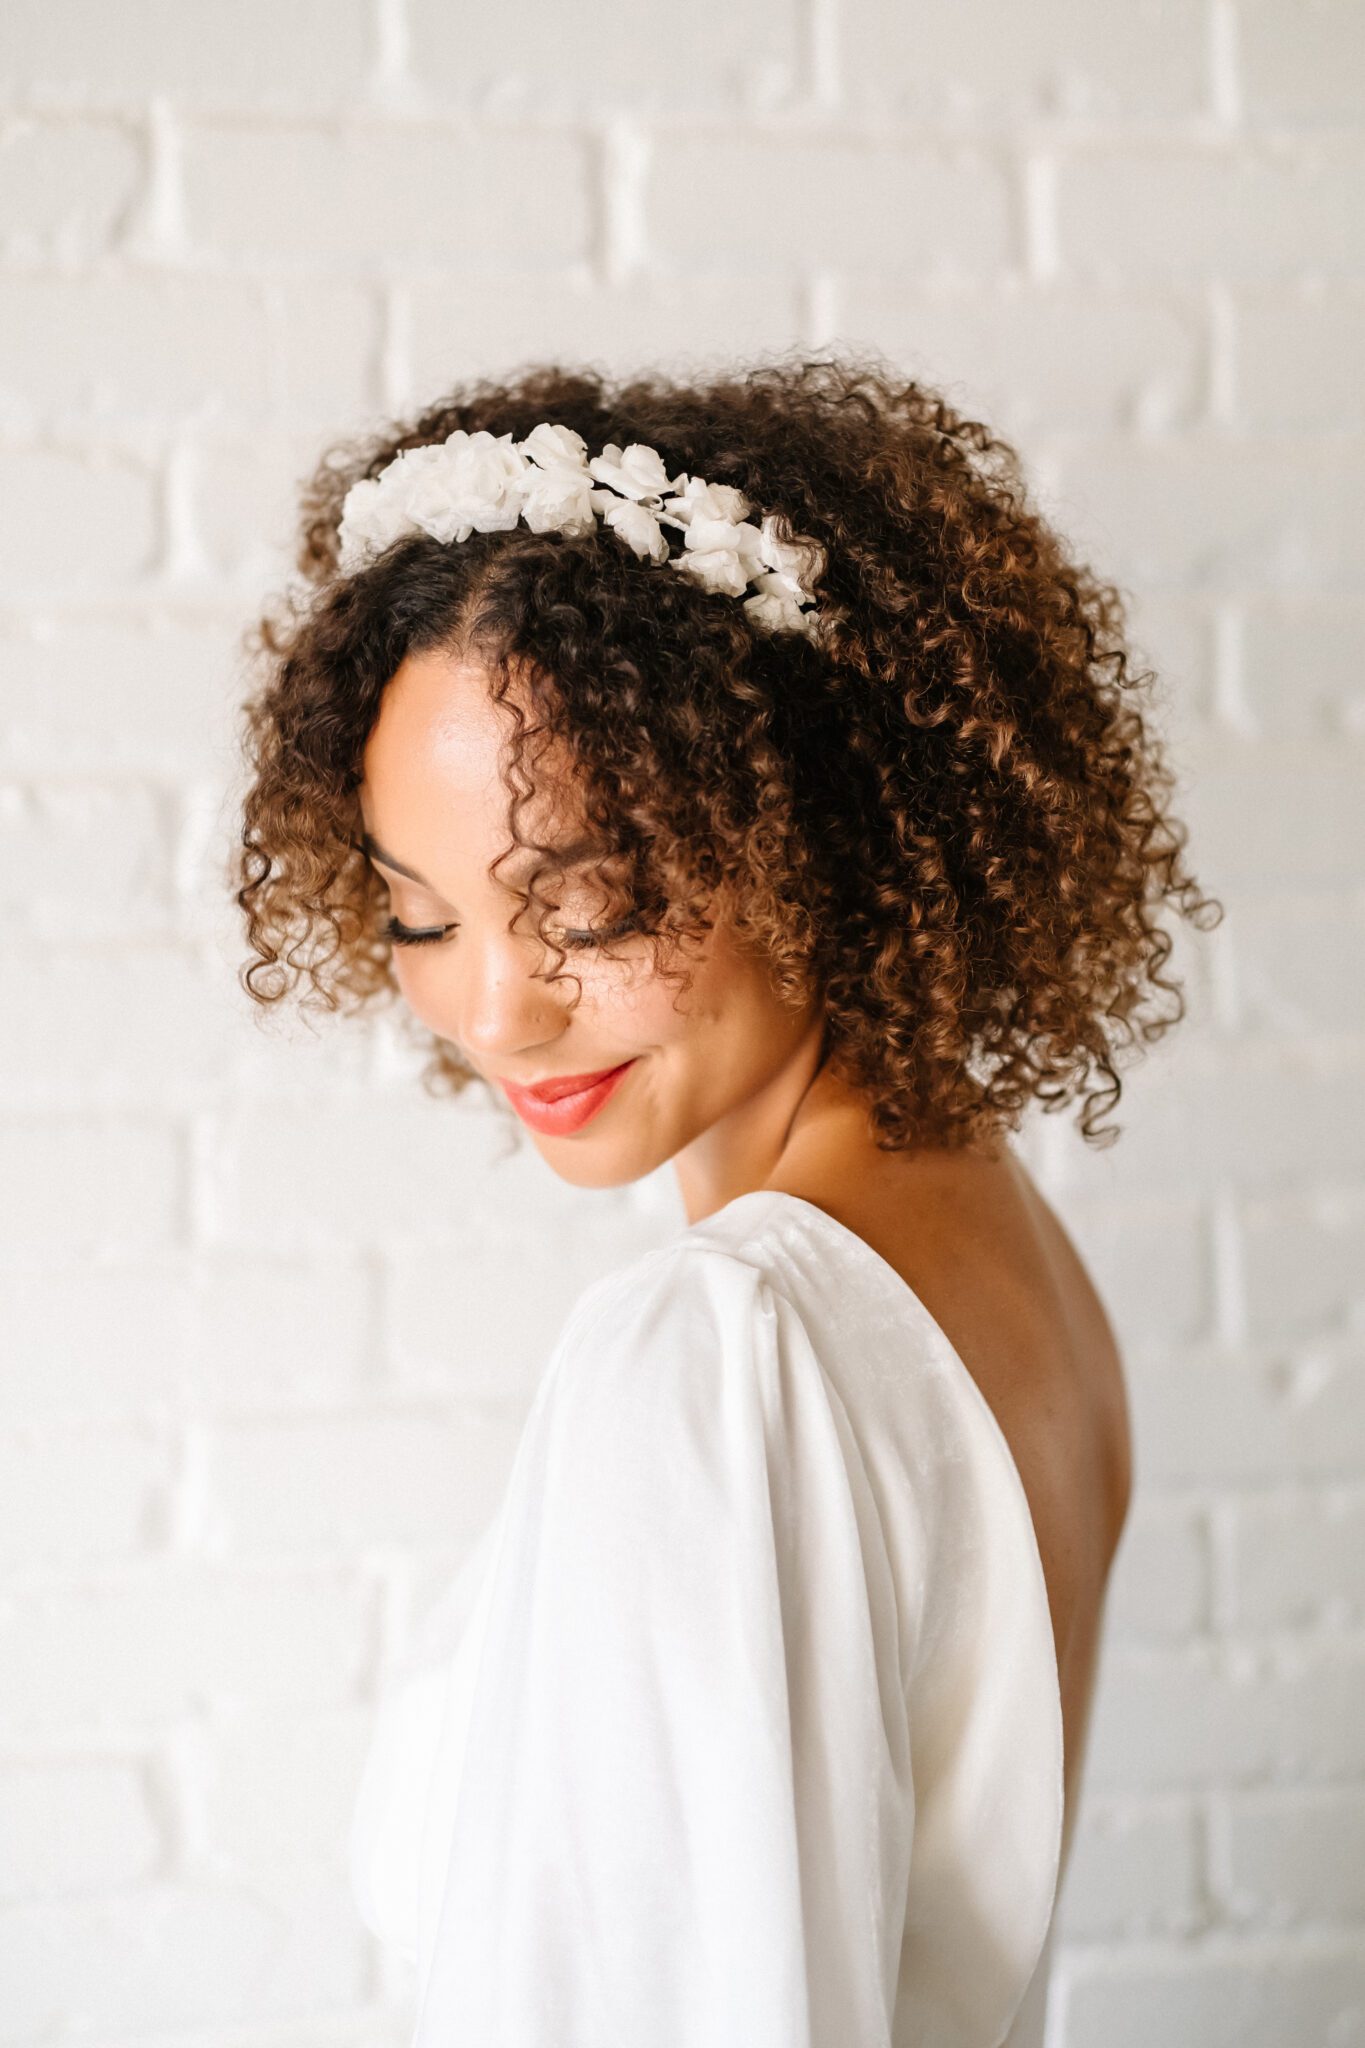 Bride wearing short bridal gown with long draped sleeves and low back, white floral headband by Simone Martin.